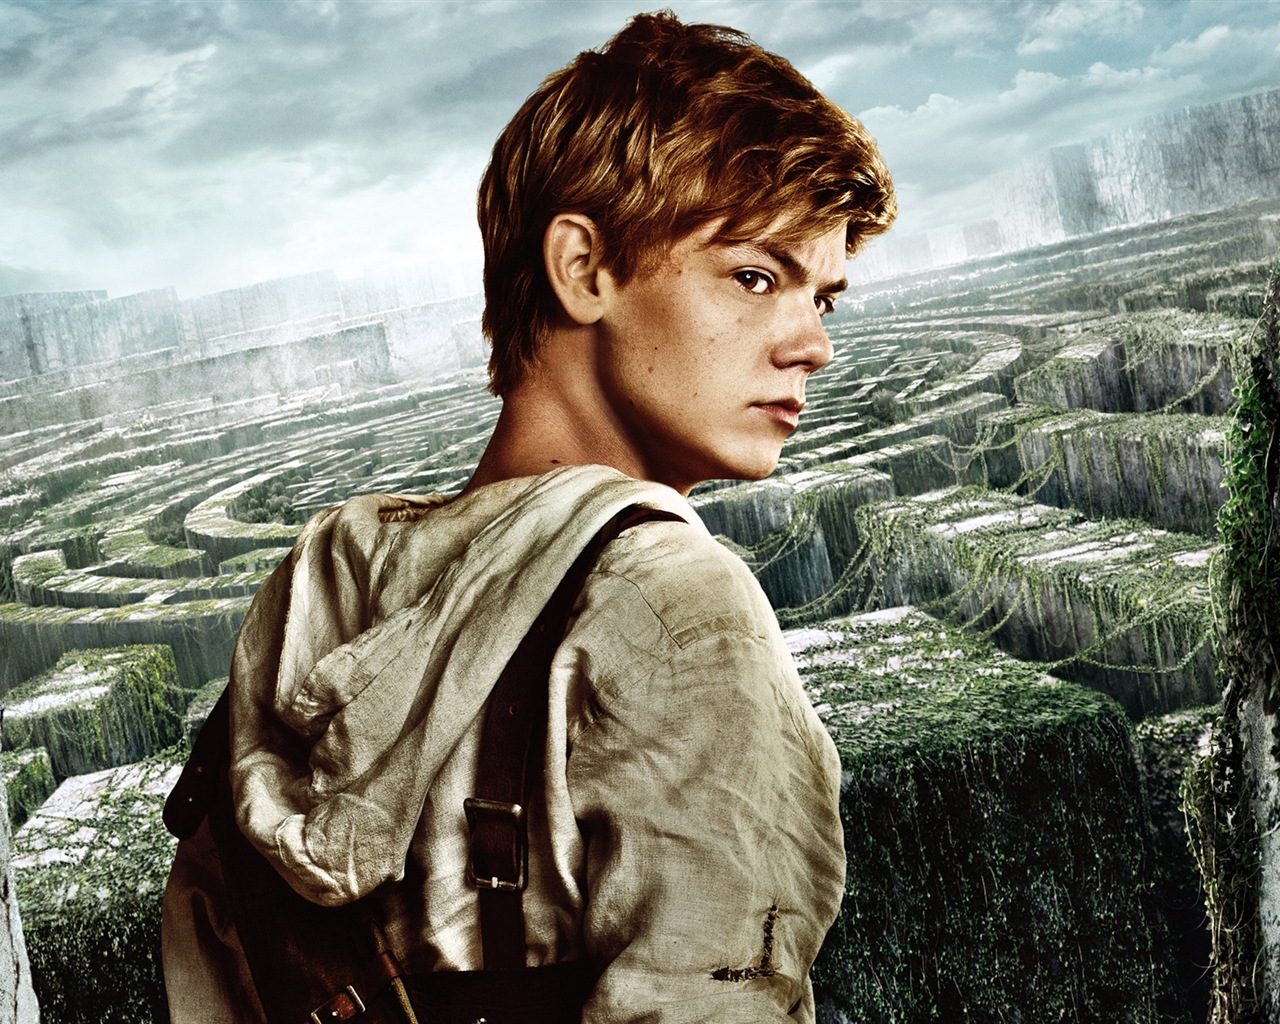 The Maze Runner HD movie wallpapers #8 - 1280x1024